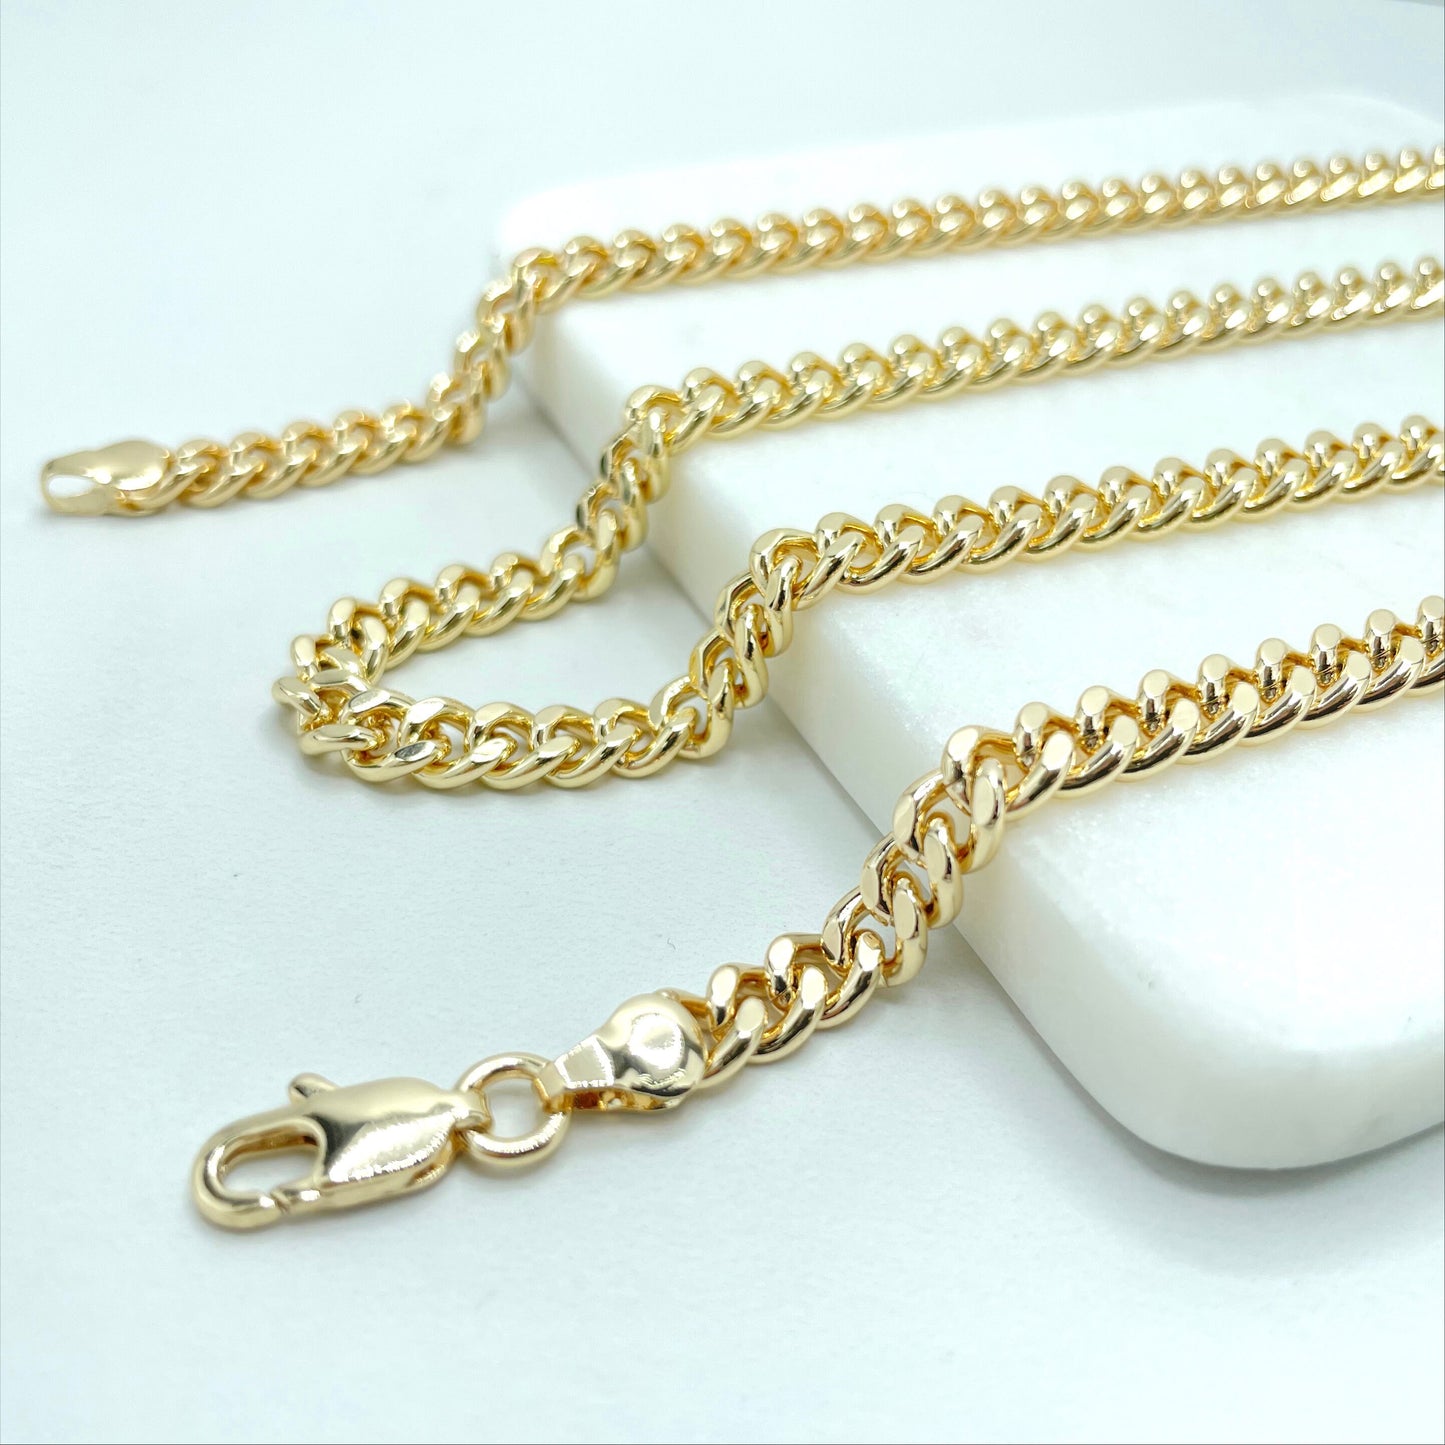 18k Gold Filled Cuban Link Chain 6mm or 7mm Unisex Curb Link Chain, Wholesale Jewelry Making Supplies